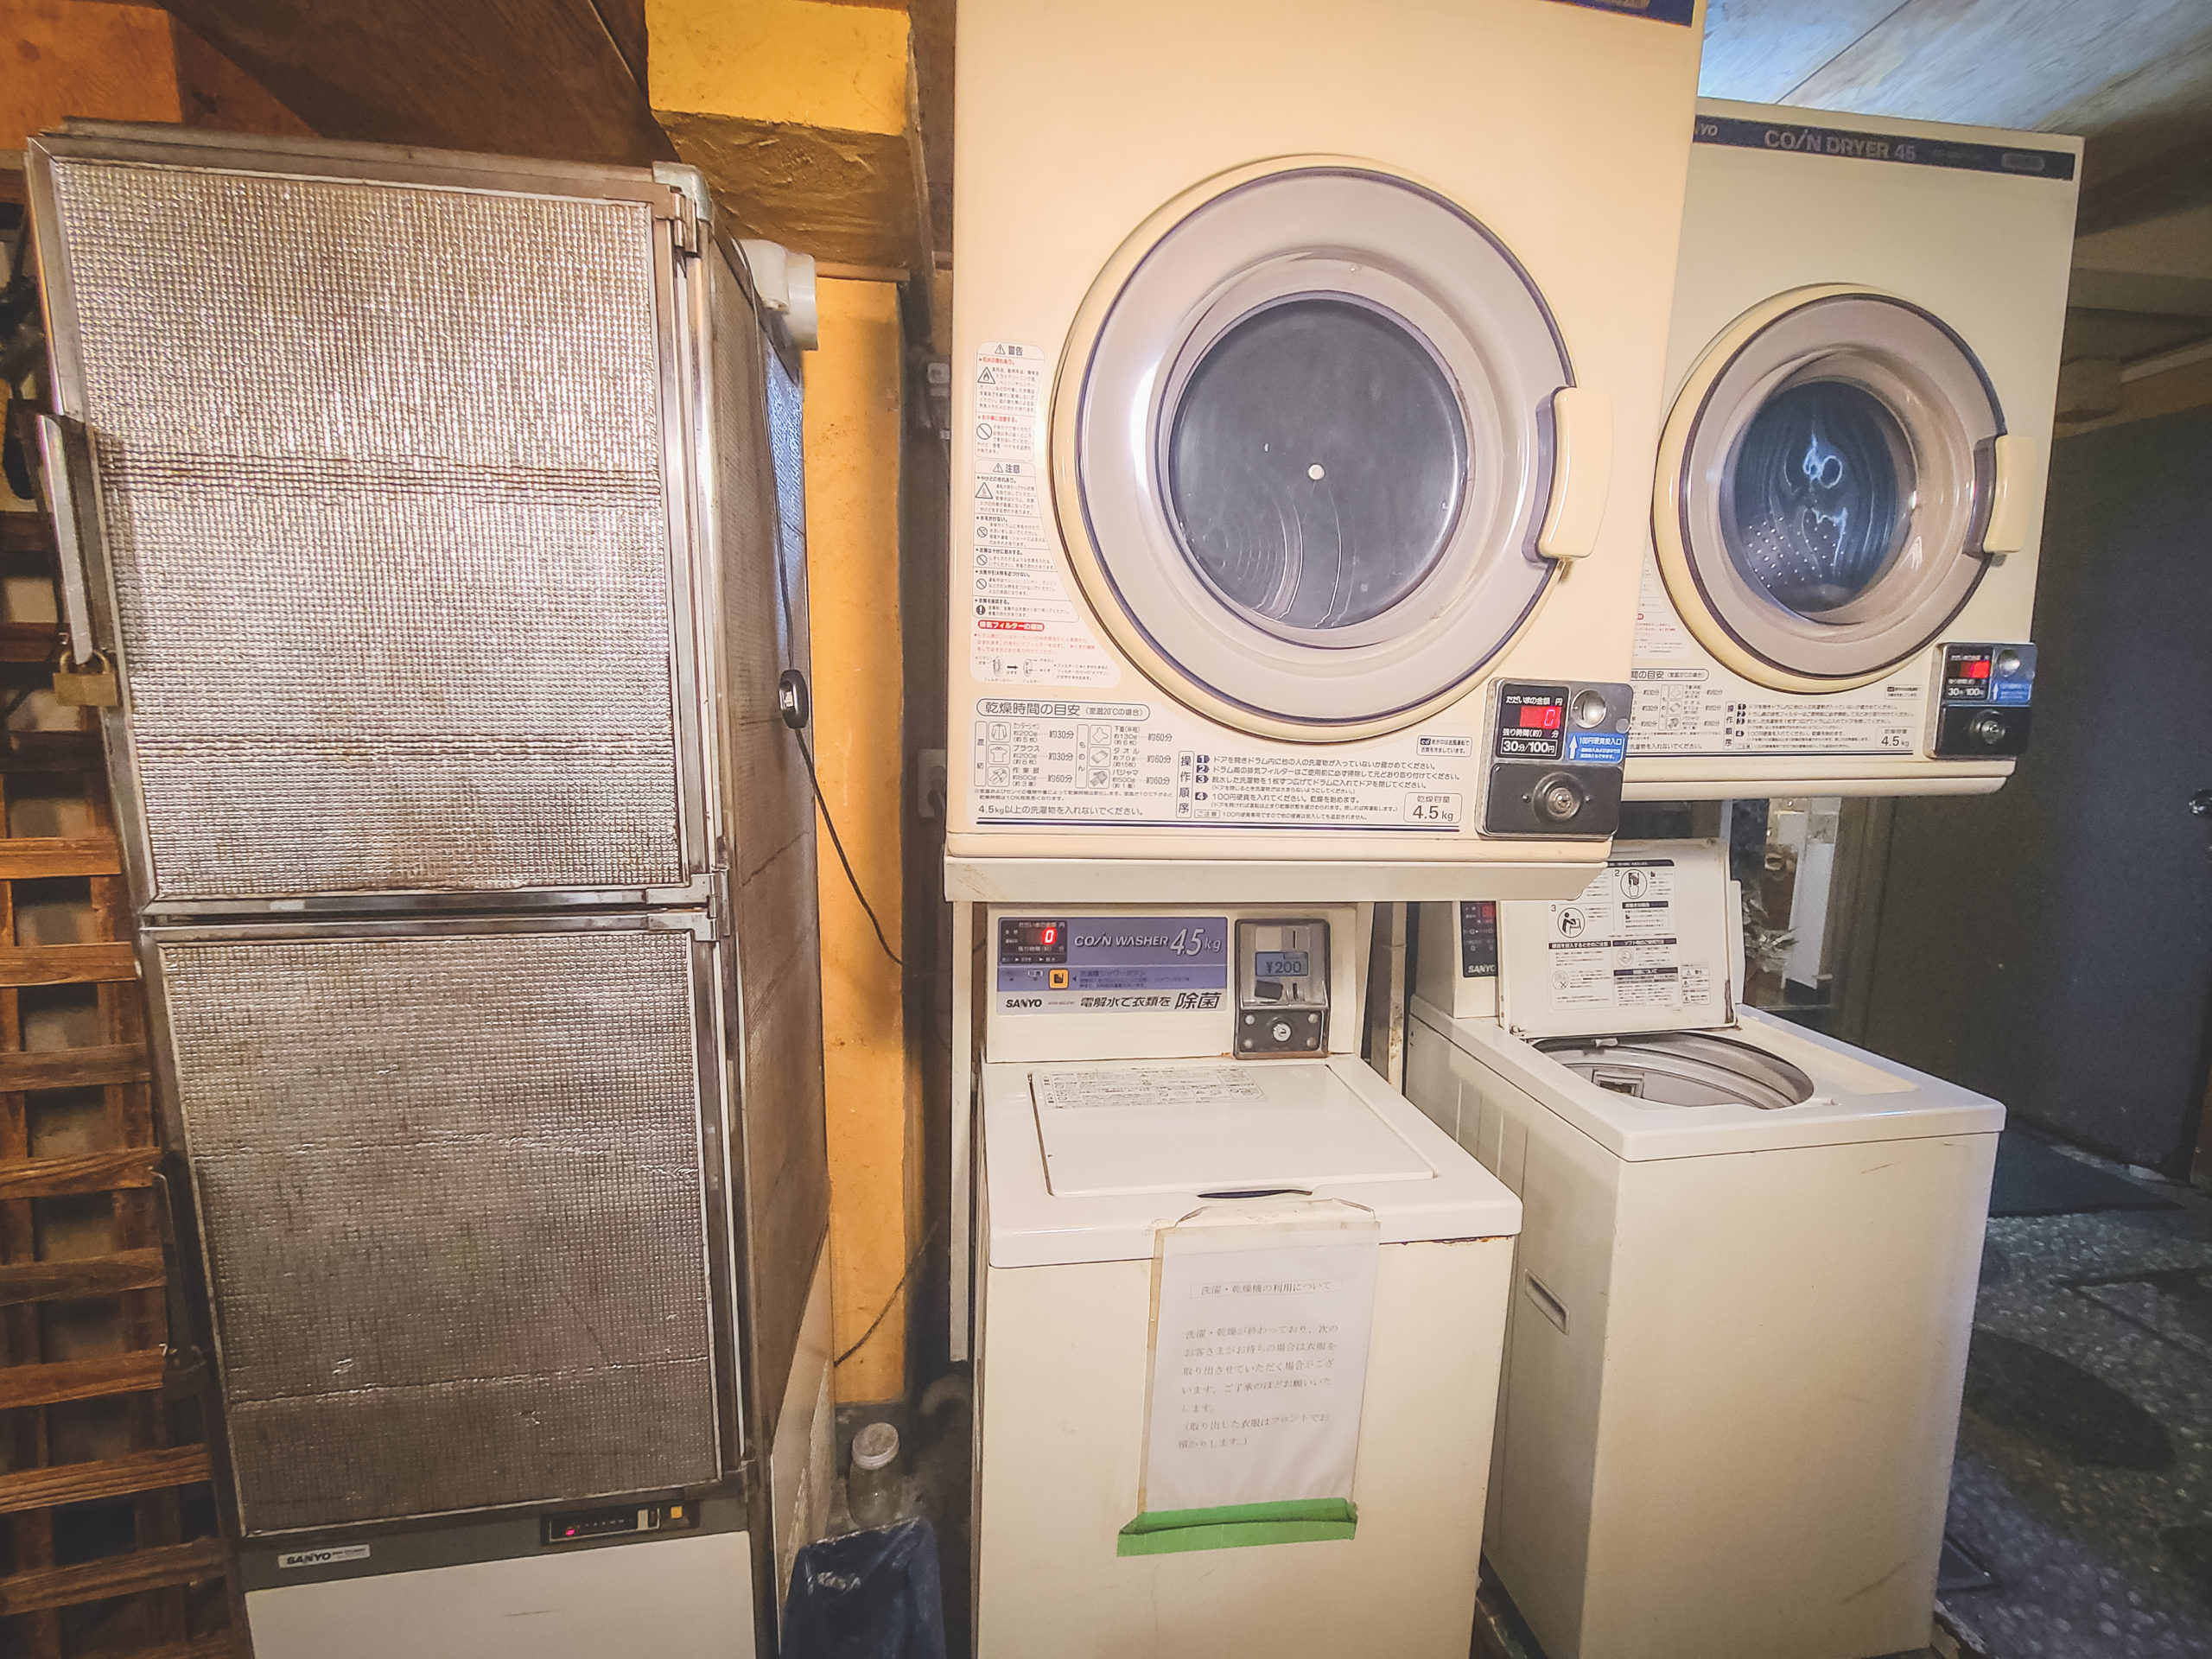 Washer/dryers are available for guest use